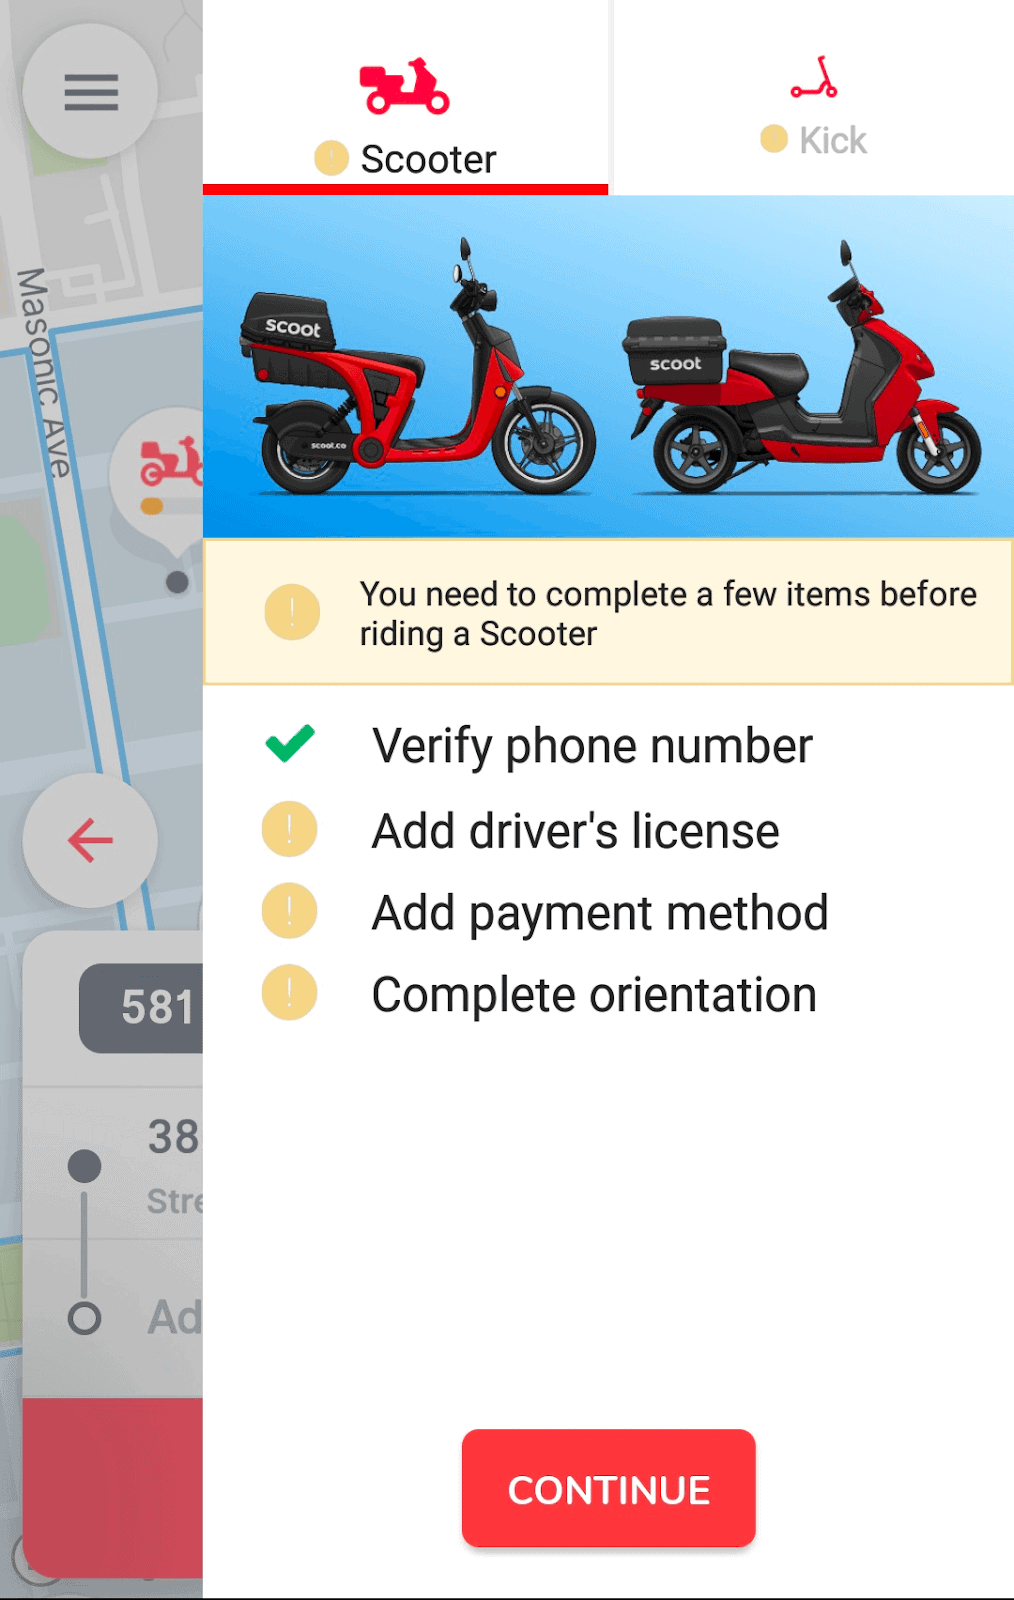 Scoot Scooters: Electric Kick Scooters for Adults in San Francisco - Verify number